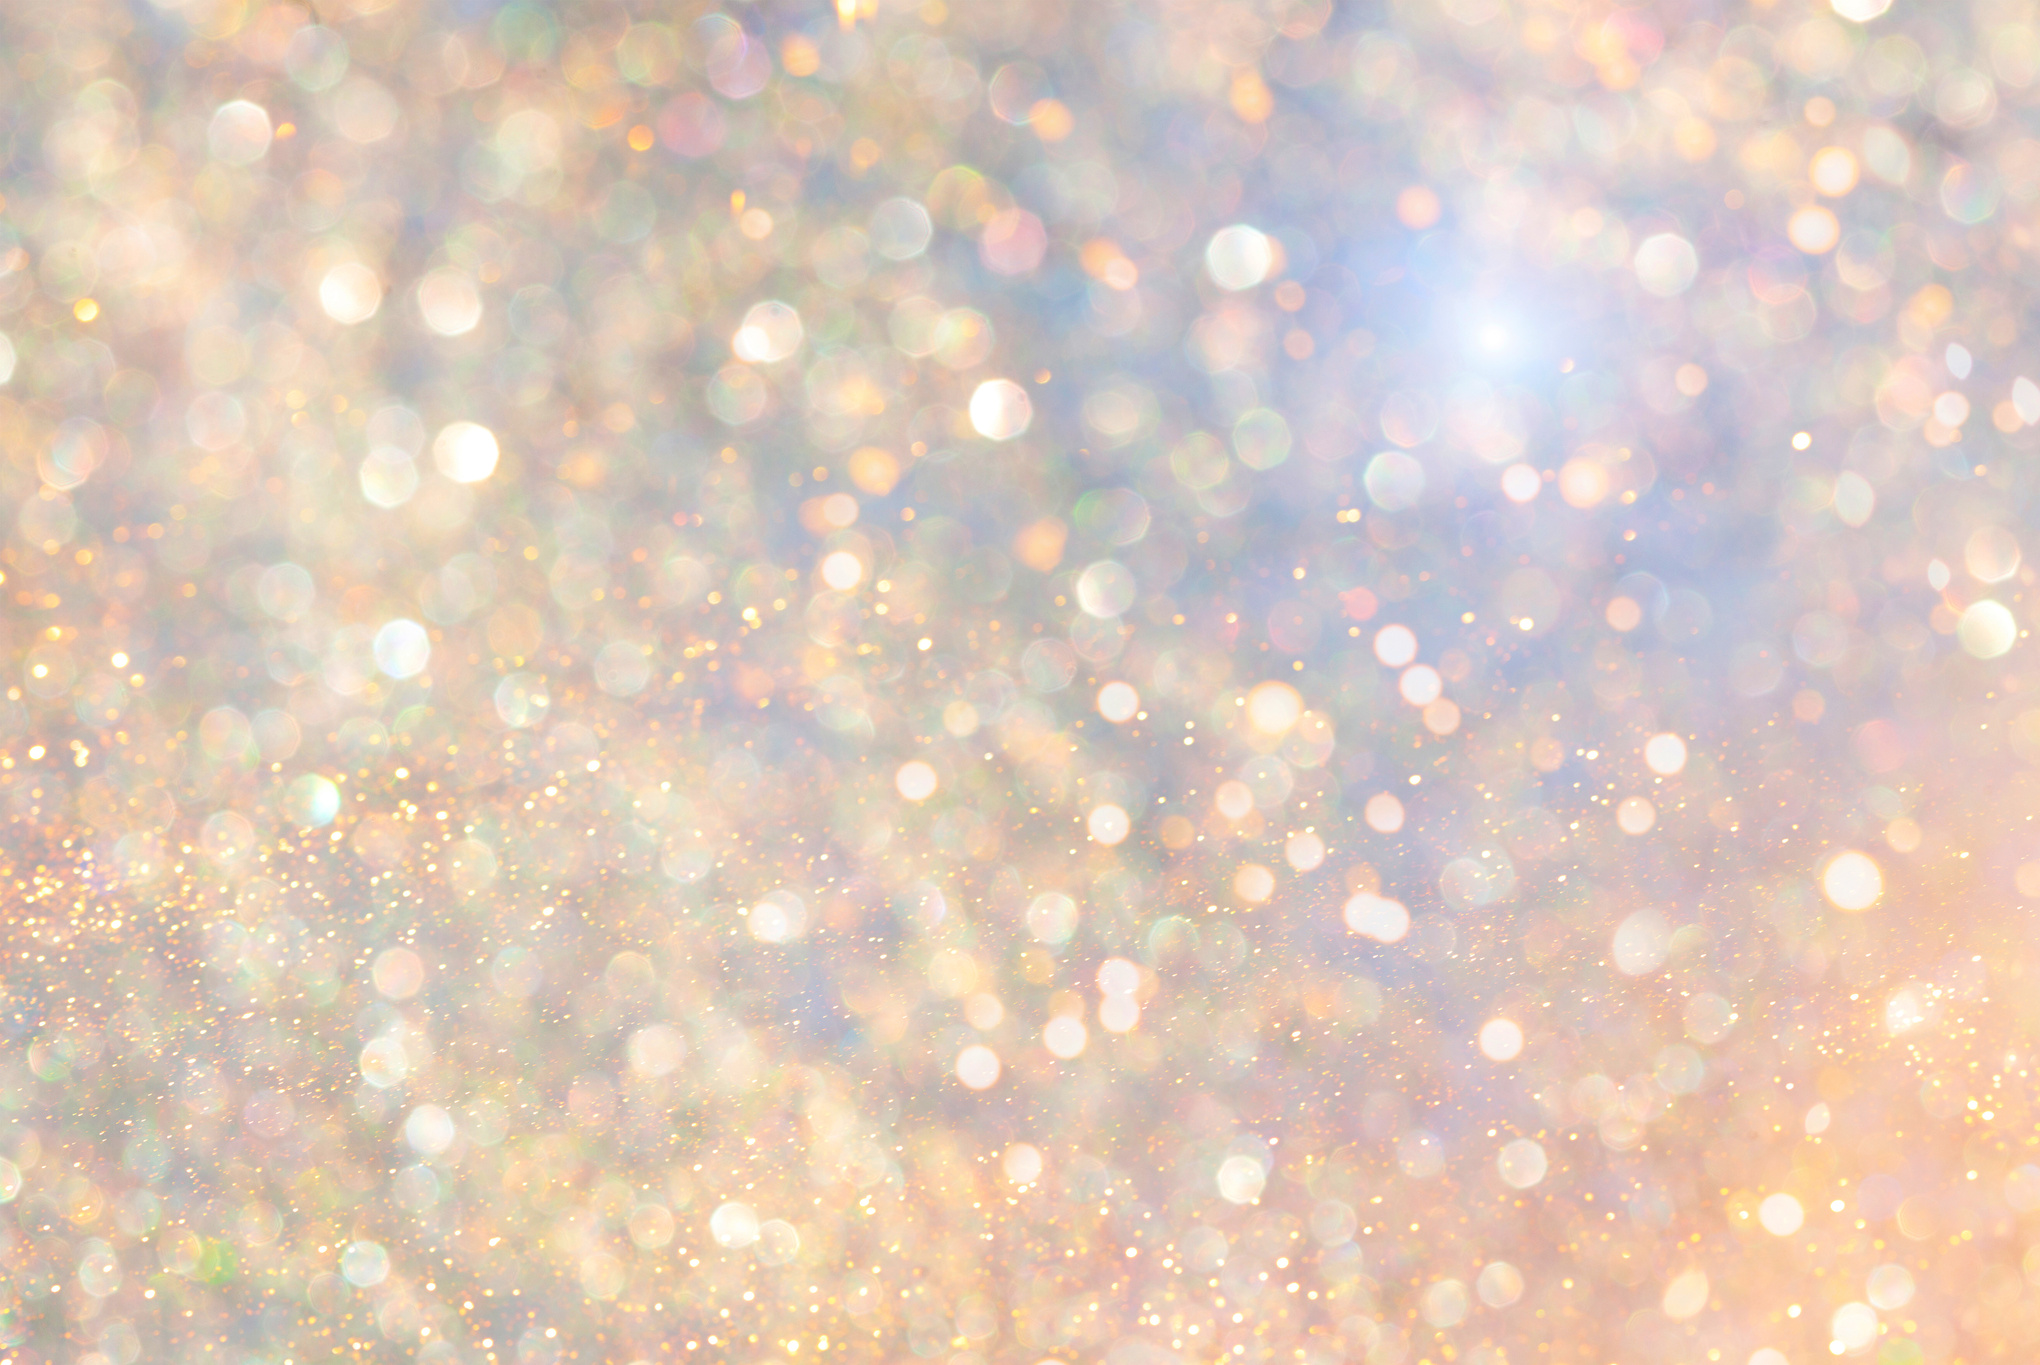 Rainbow Background with Shiny Gold Sequins